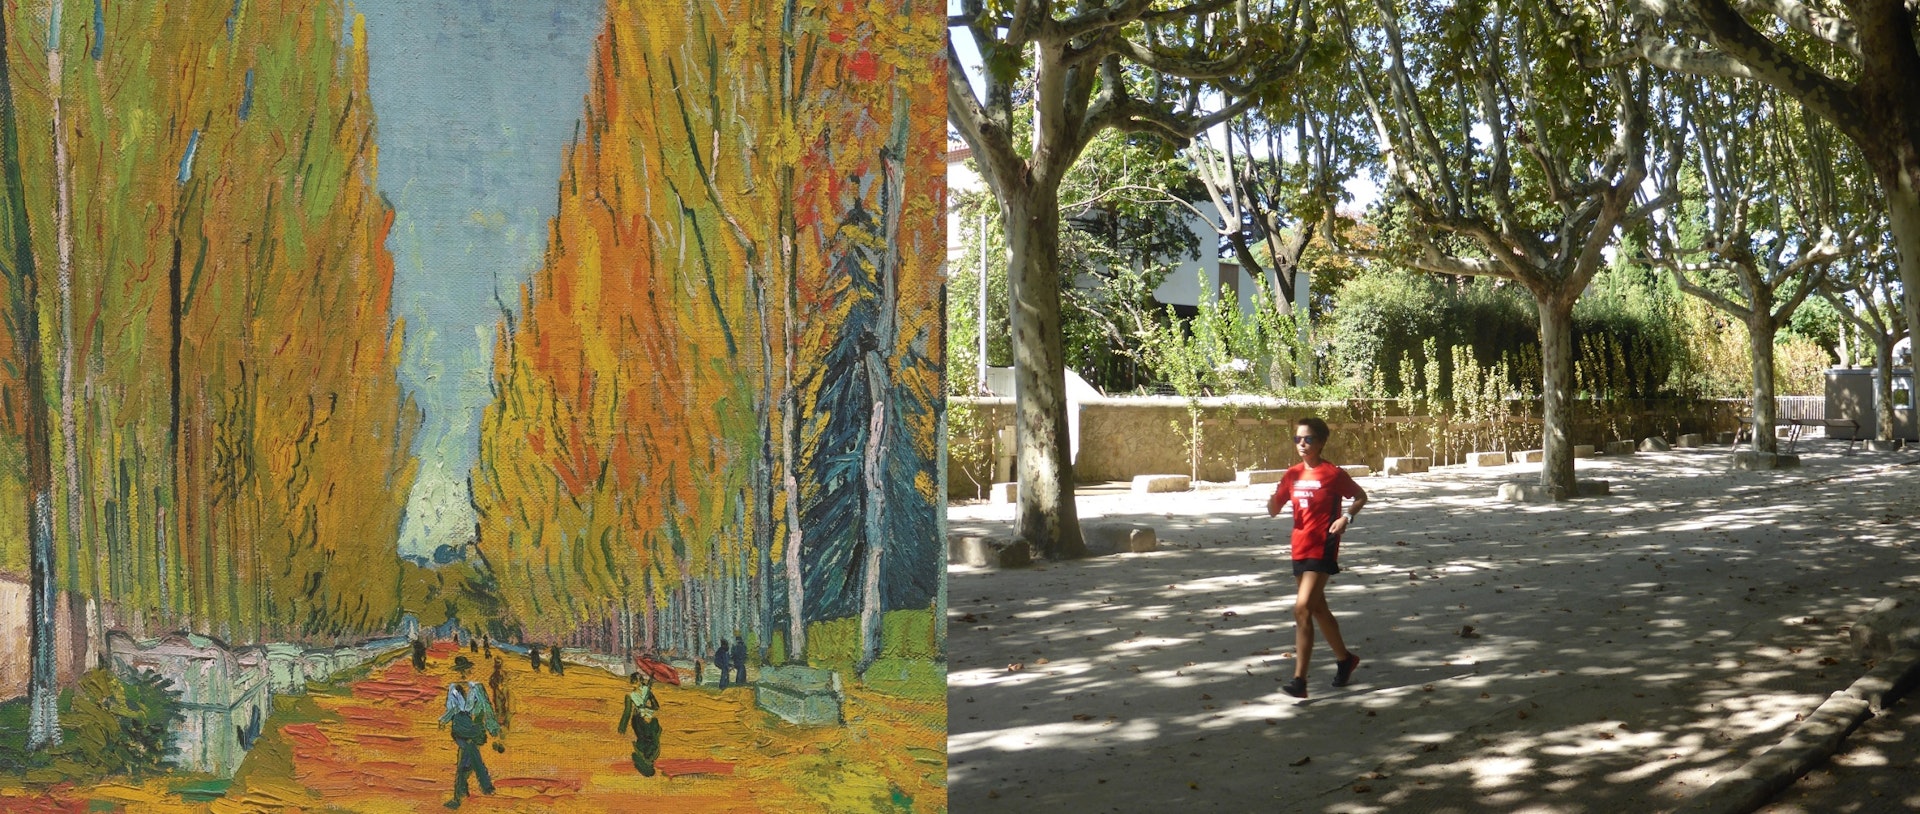 On the left is Van Gogh's painting; full of autumn colours of orange and yellow it looks down the middle of a line of trees. On the right is Alecsa running down this same tree-lined boulevard.